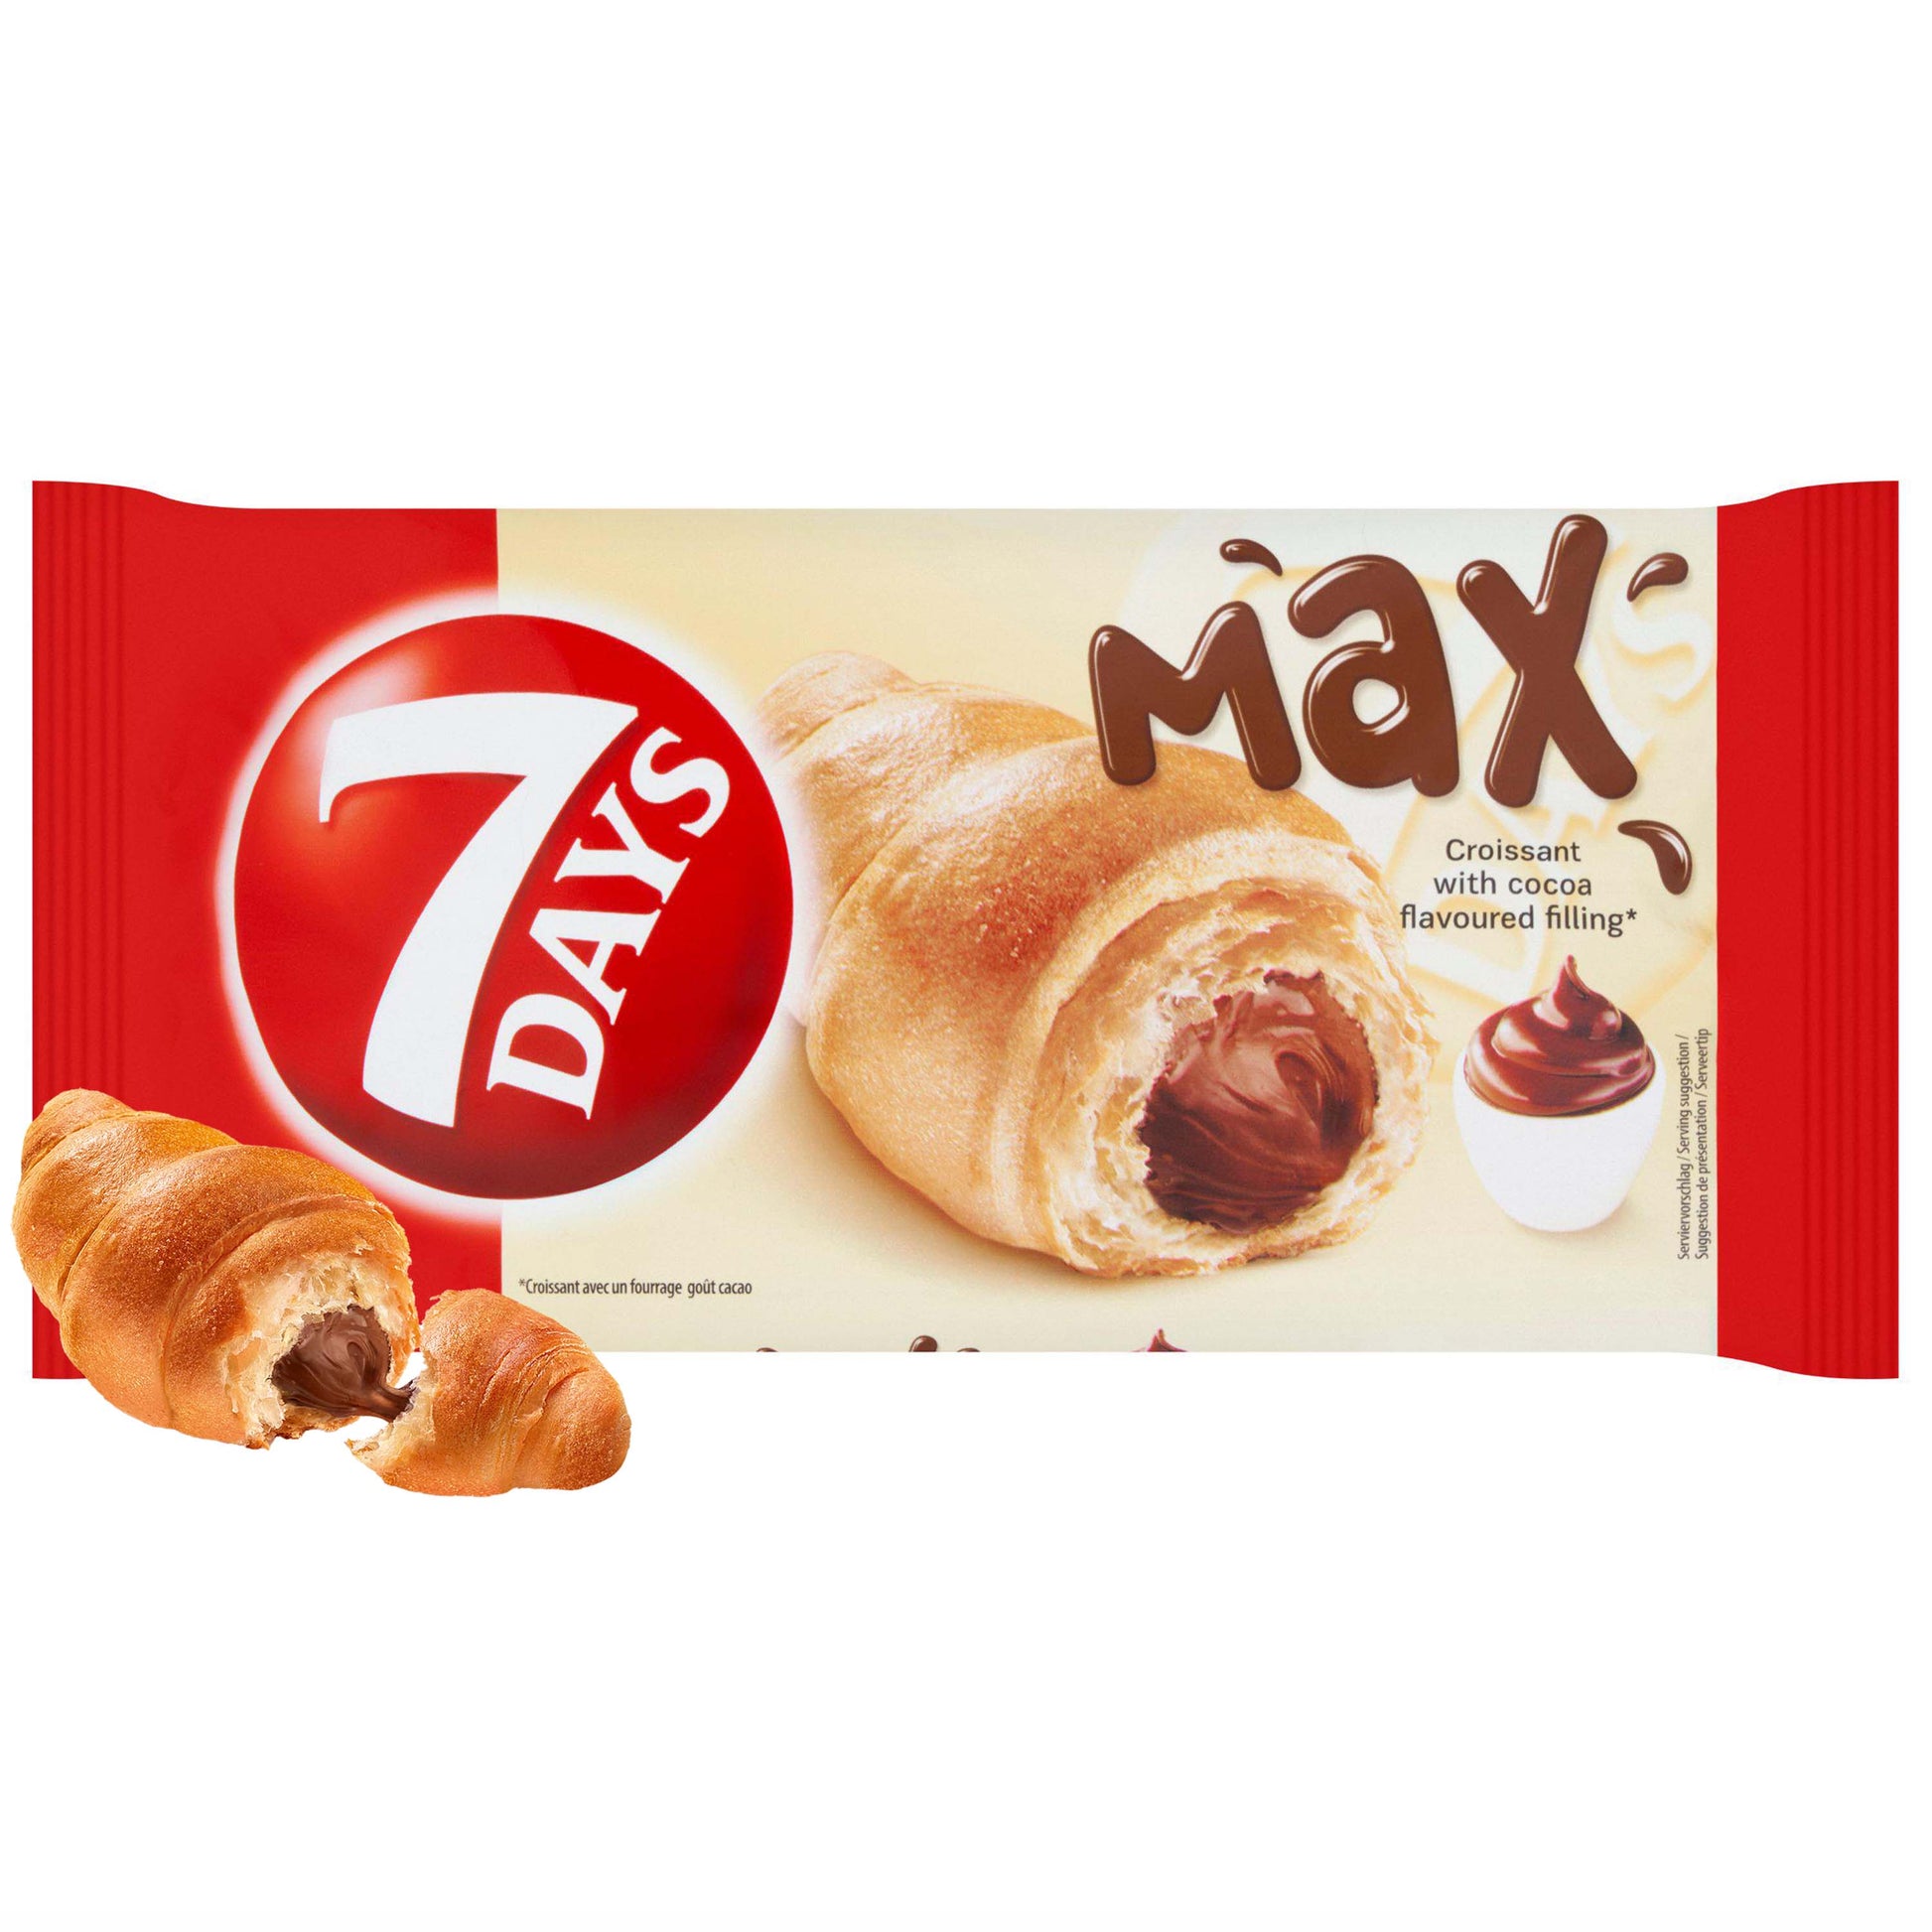 7 Days Croissant with Cocoa Filling Mах - 80g - Snacks